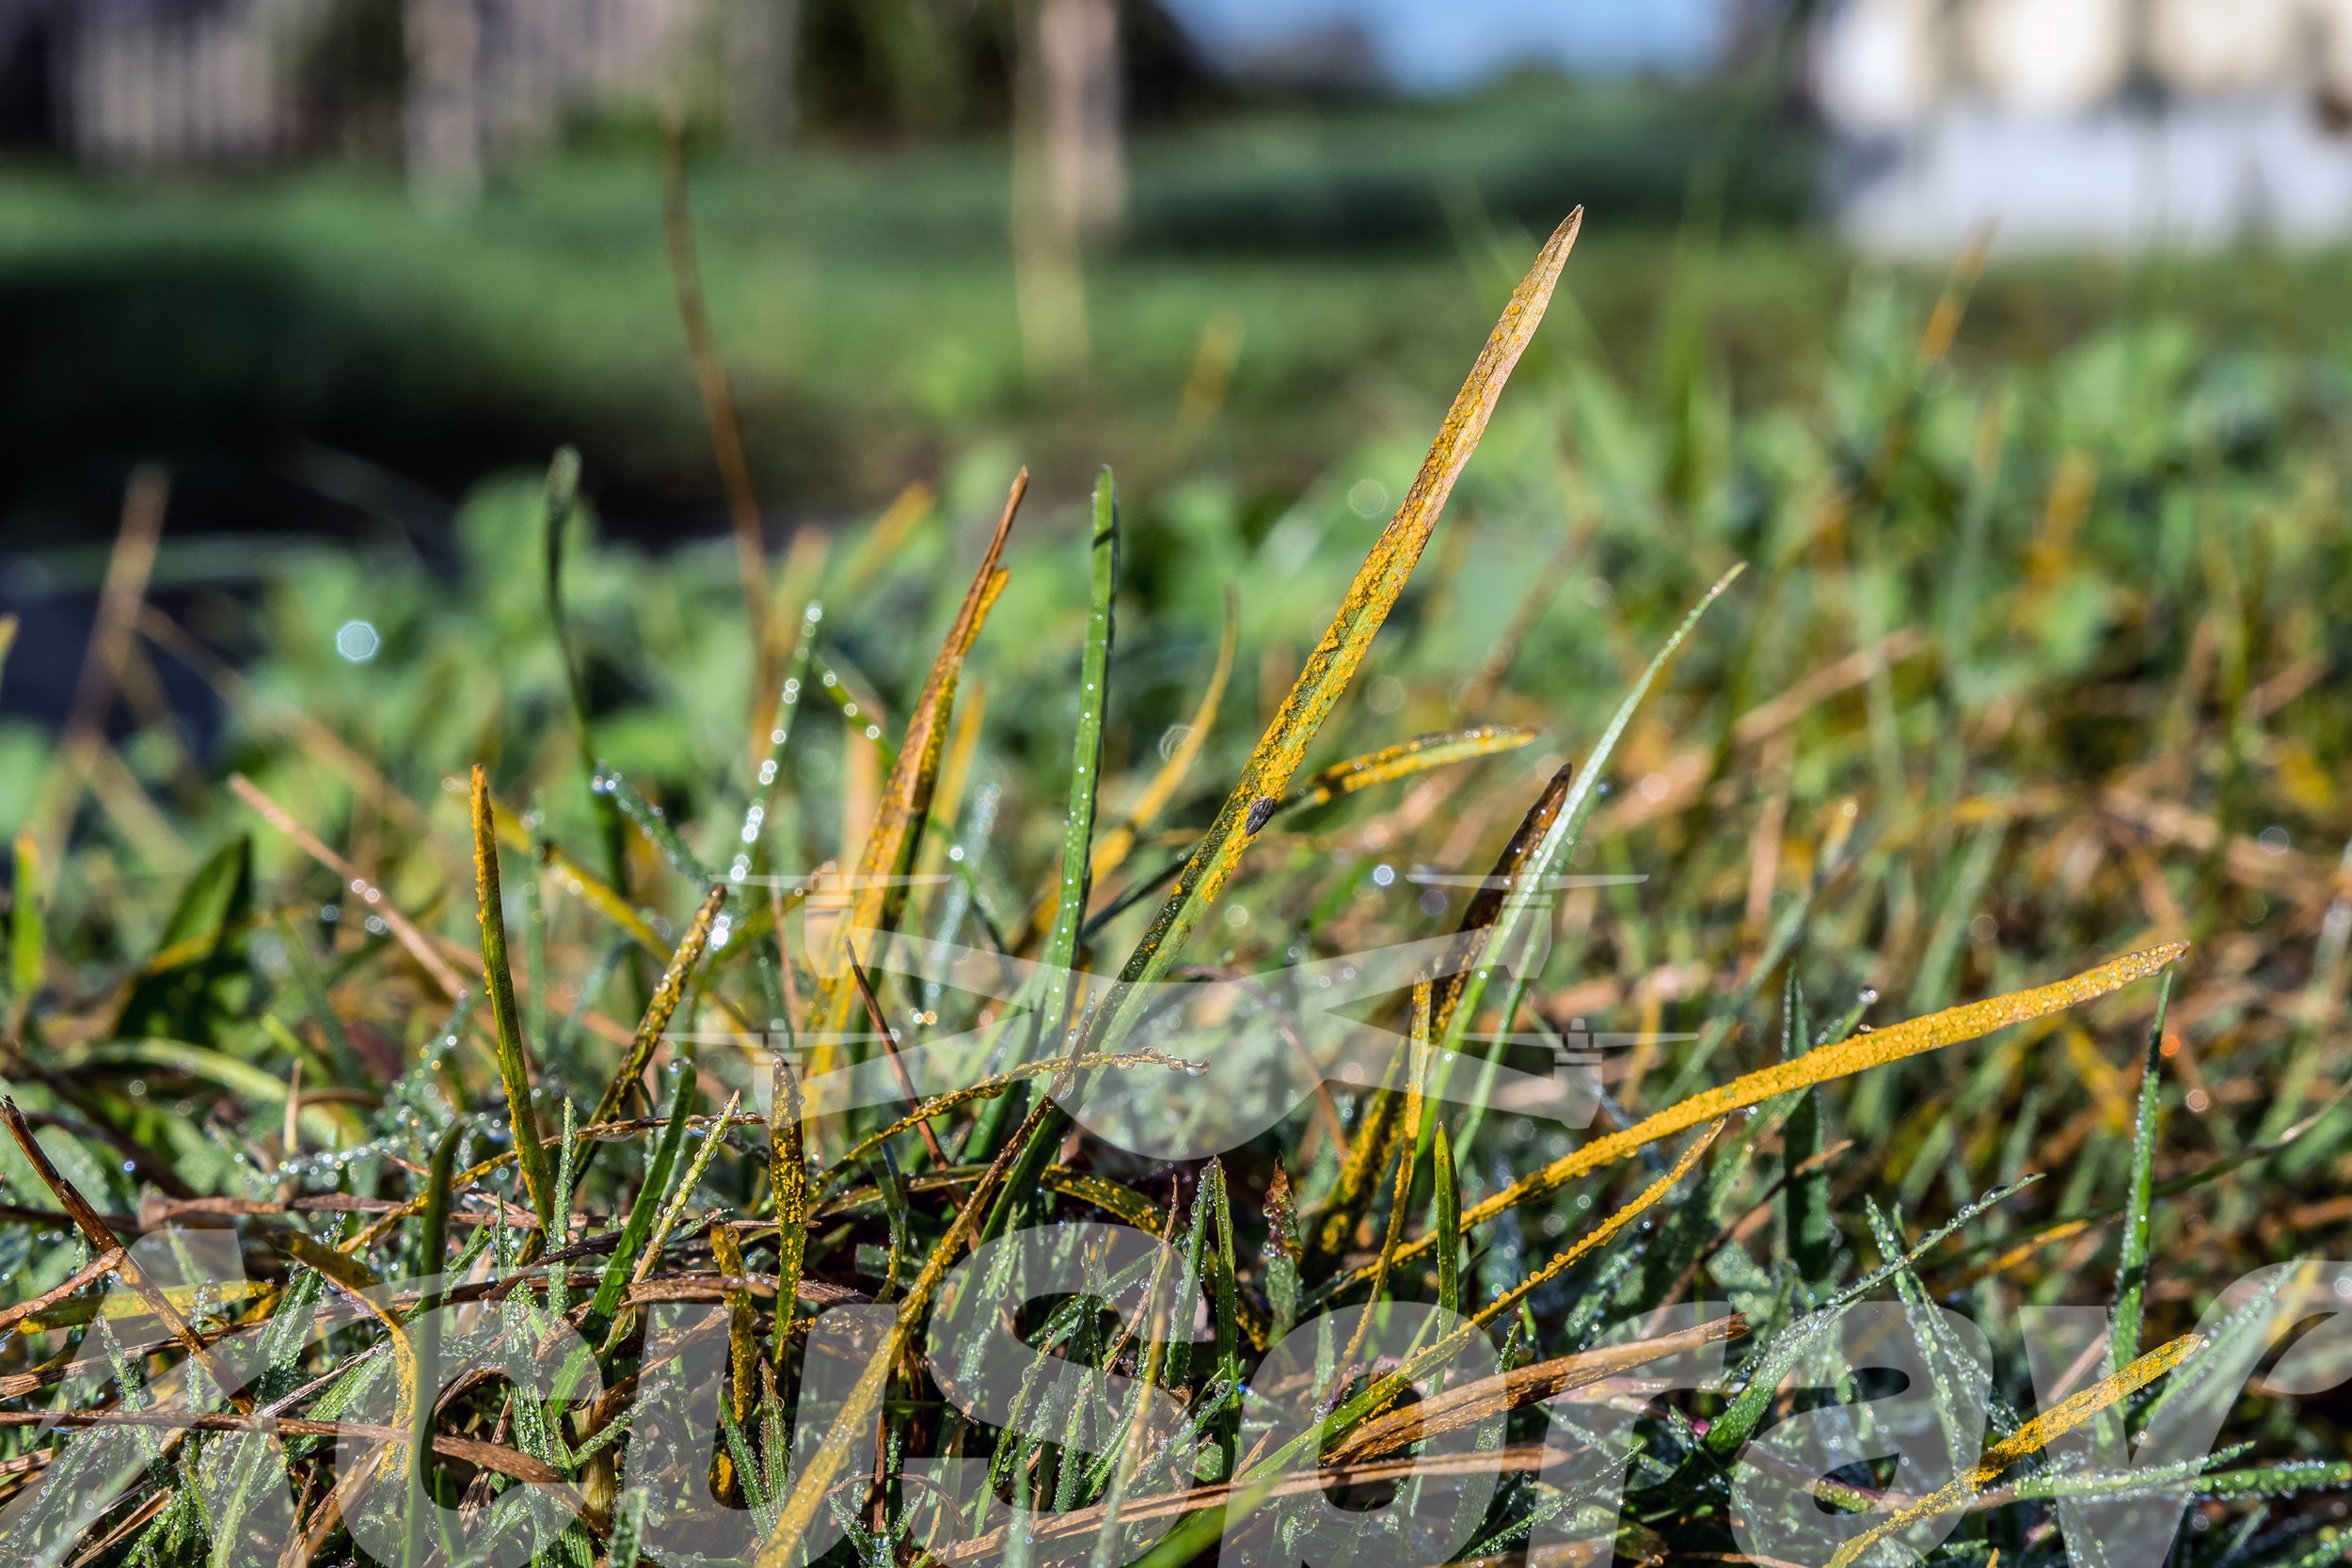 Close-up view of turf disease, illustrating the need for effective golf course disease control.